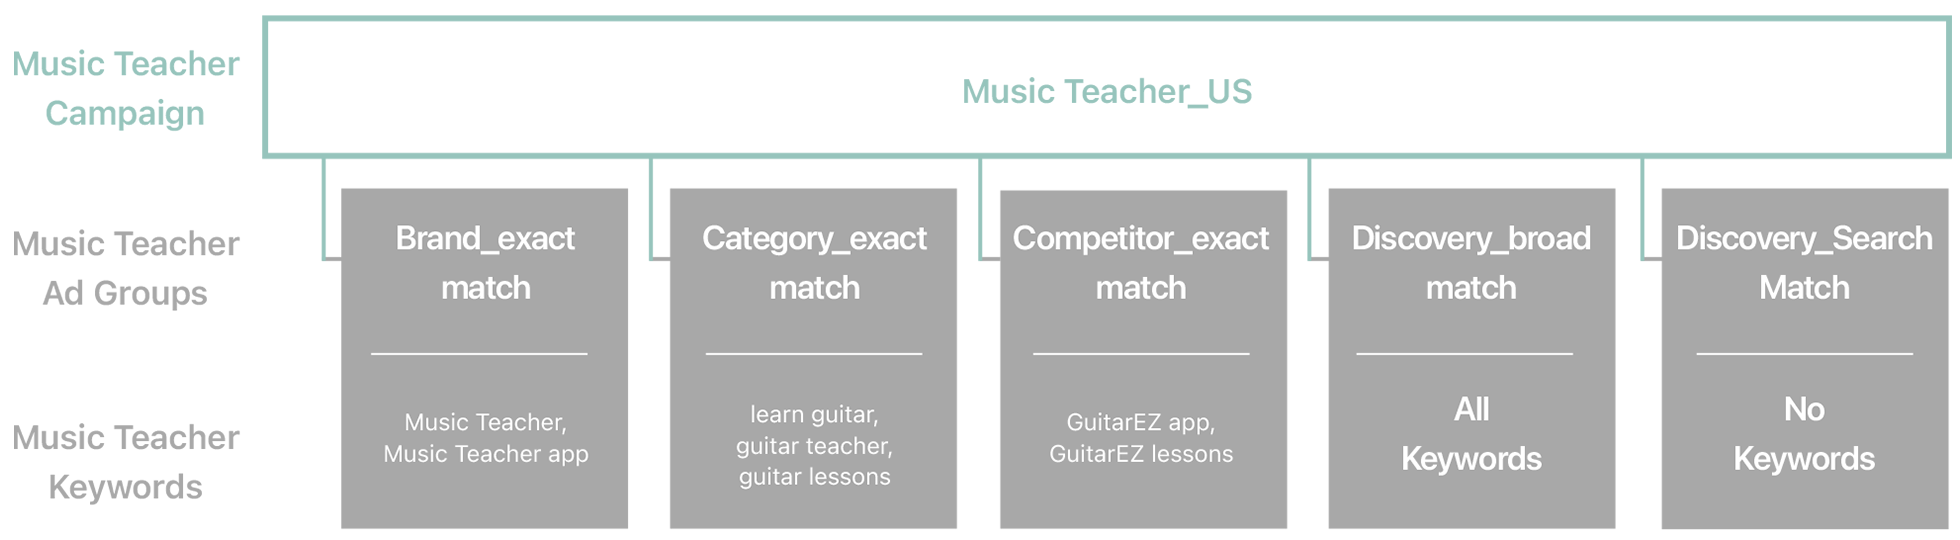 A diagram of an example campaign named Music Teacher_US. The top row is Music Teacher Campaign, the second row is Music Teacher Ad Groups, and the third row is Music Teacher Keywords. The Music Teacher_US campaign connects to the following ad groups and keywords: Brand_exact match, with keywords Music Teacher and Music Teacher app; Category_exact match, with keywords learn guitar, guitar teacher, and guitar lessons; Competitor_exact match, with keywords GuitarEZ app and GuitarEZ lessons; Discovery_broad match with All Keywords; and Discovery_Search Match with No Keywords.